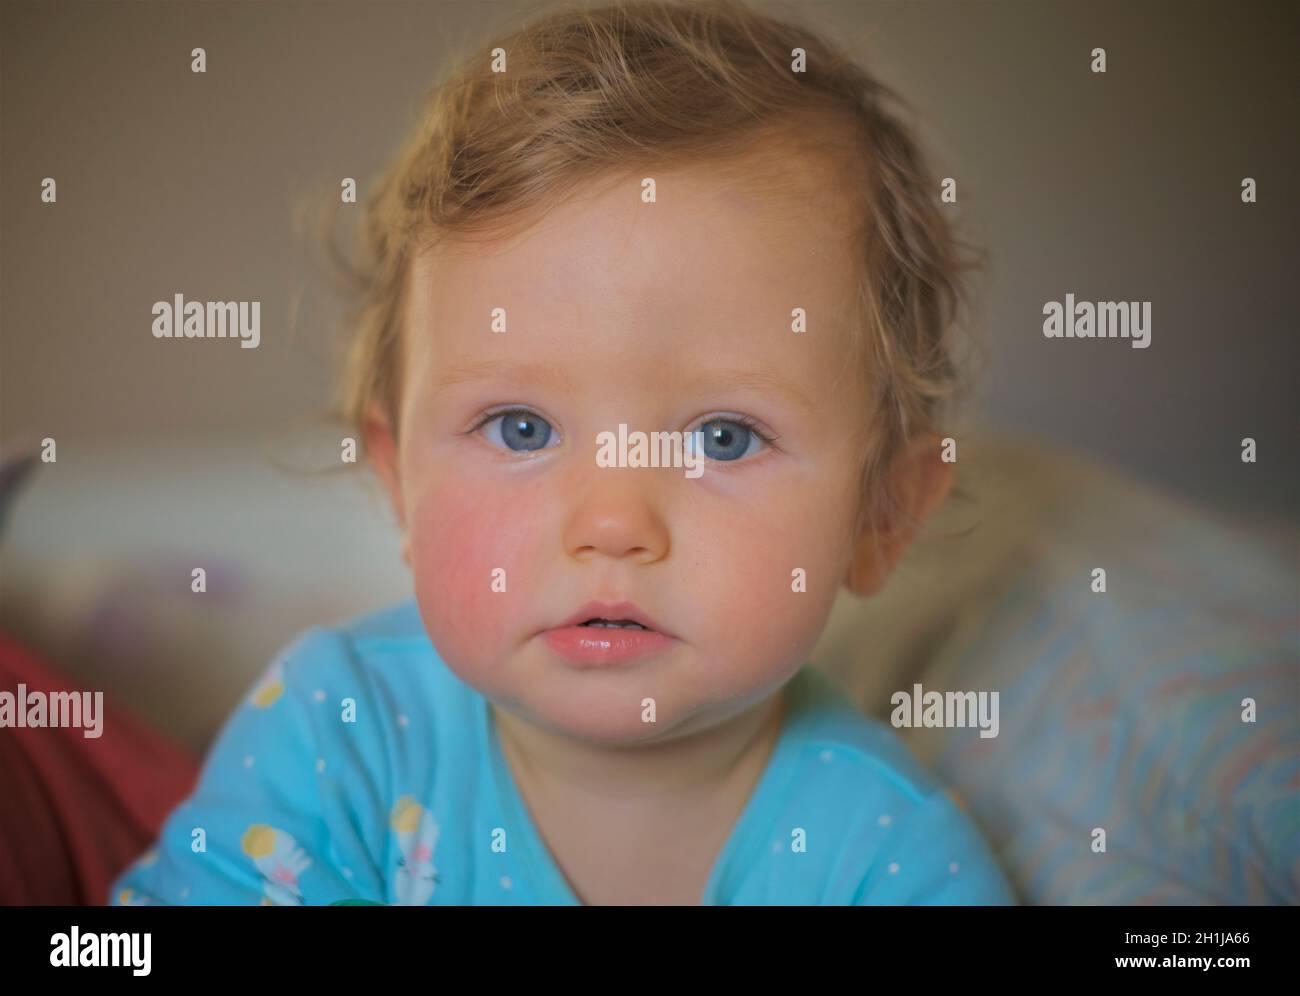 Portrait of a young teething baby girl with a rosy cheek. Toddler. Model Released. Stock Photo